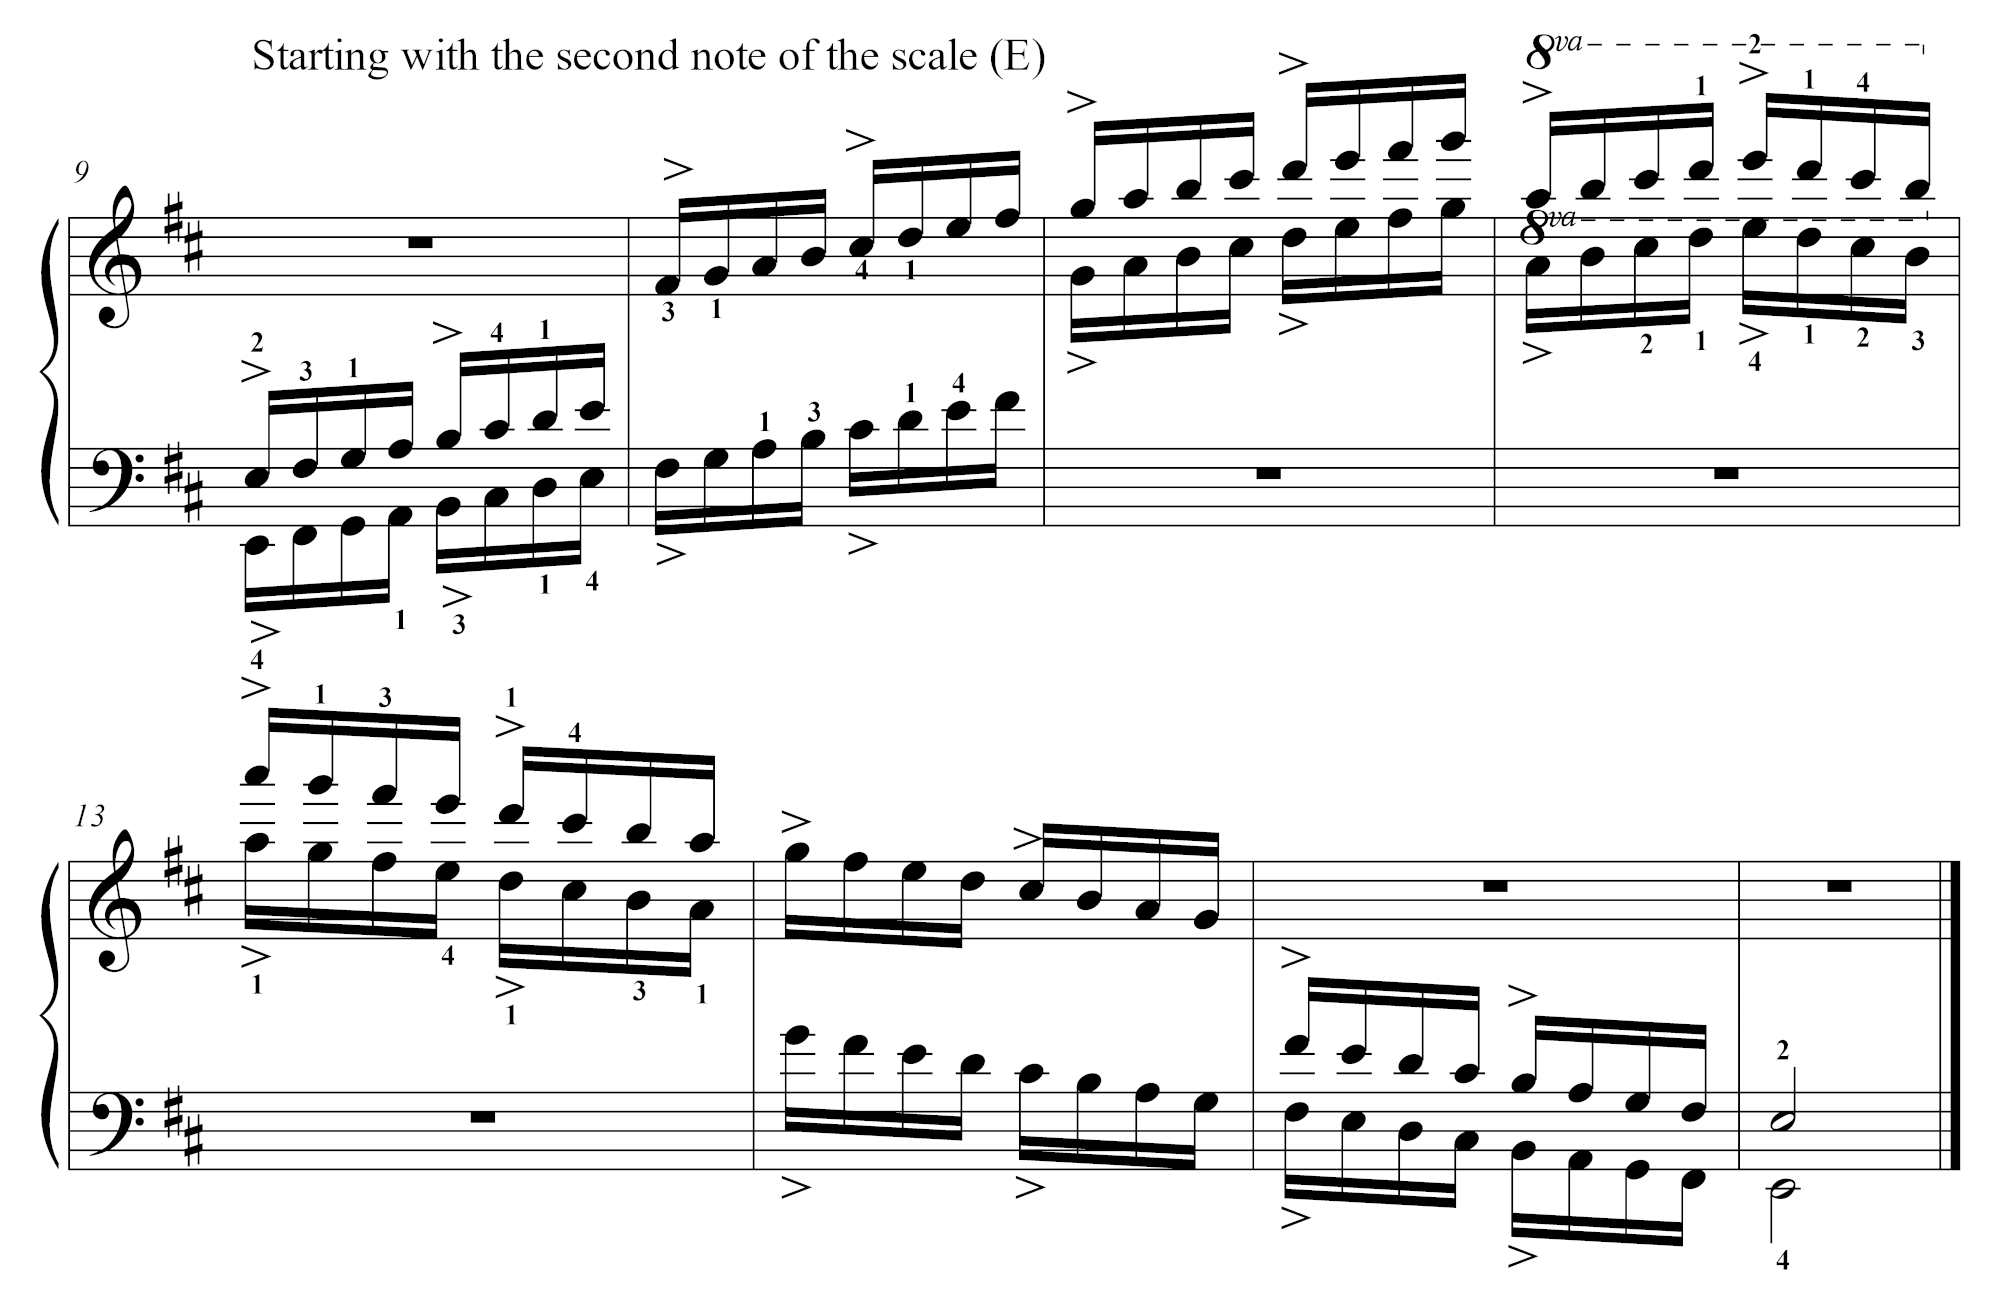 D major piano scale - advanced exercise starting from each consecutive note - E